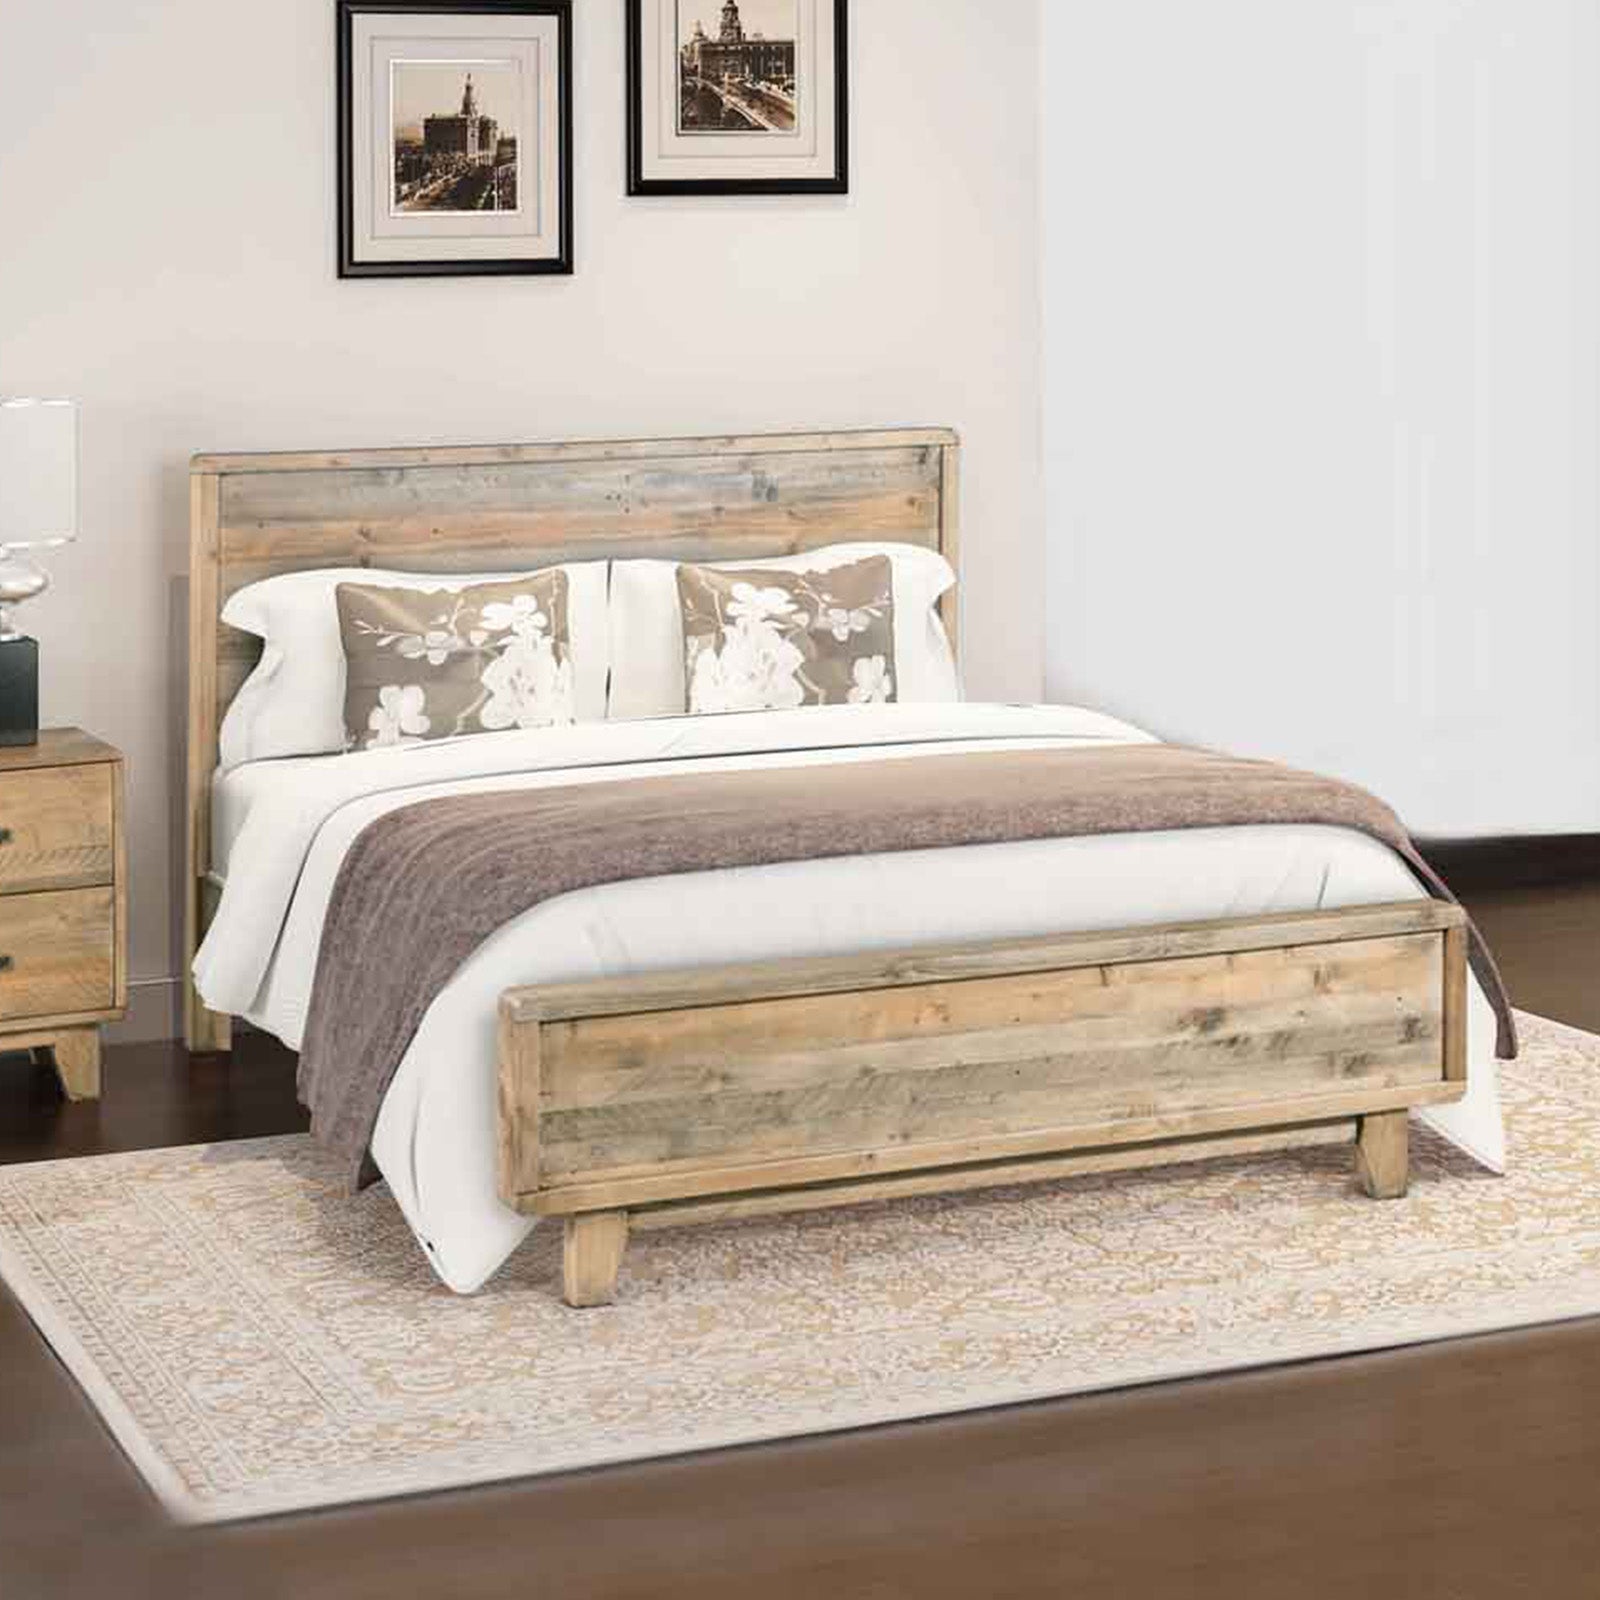 Double Size Wooden Bed Frame in Solid Wood Antique Design Light Brown - SILBERSHELL